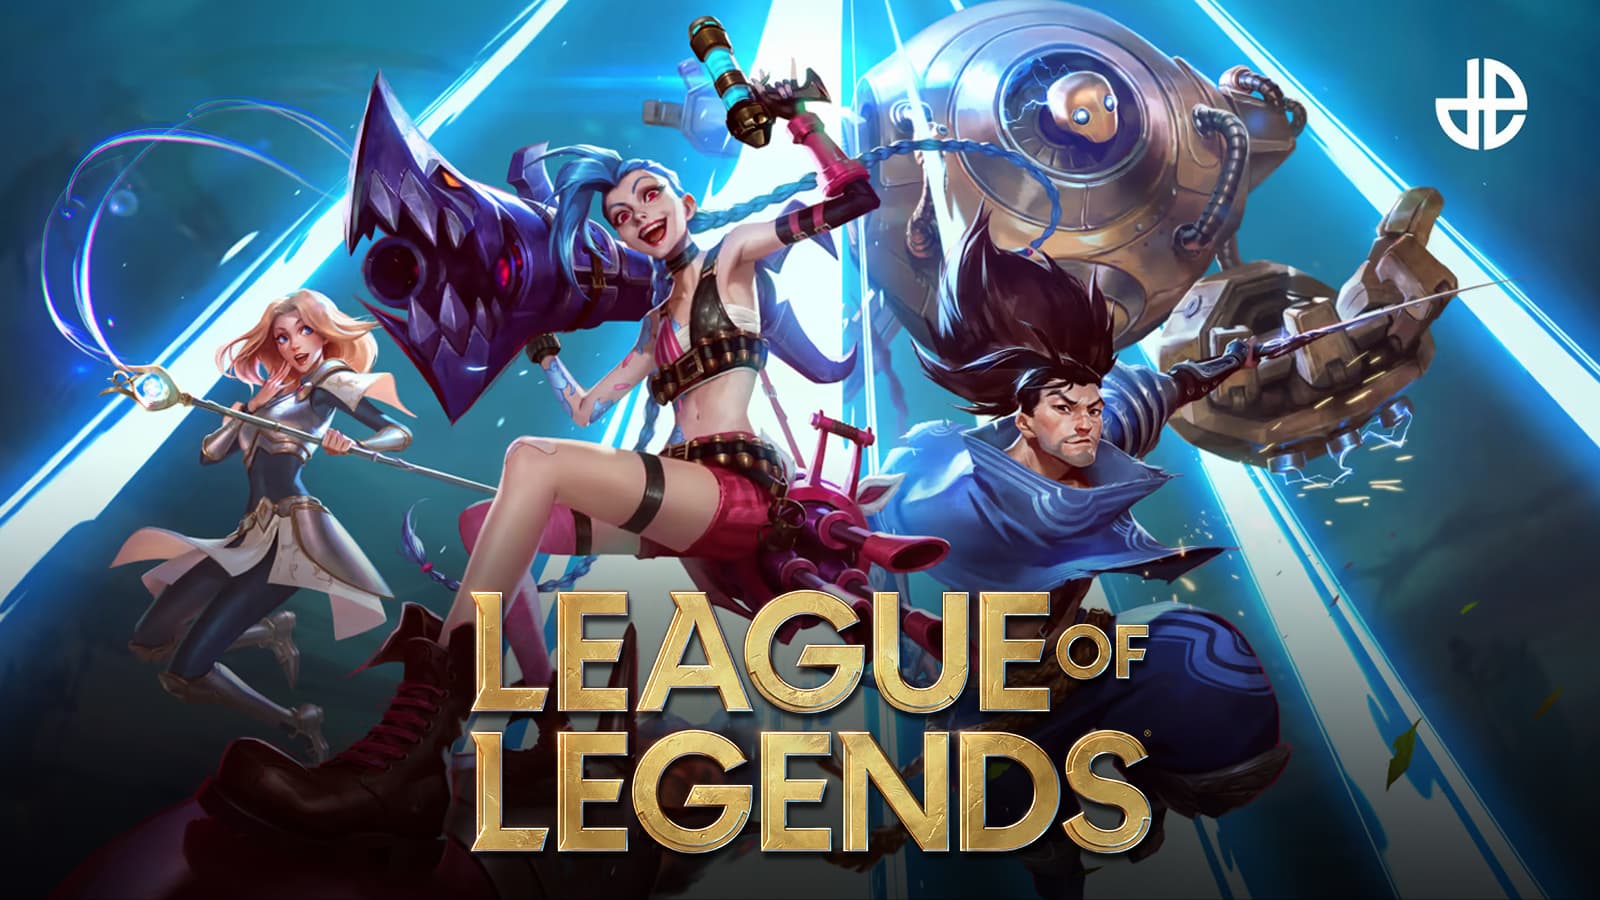 League of legends season 12 2022 wallpaper with characters